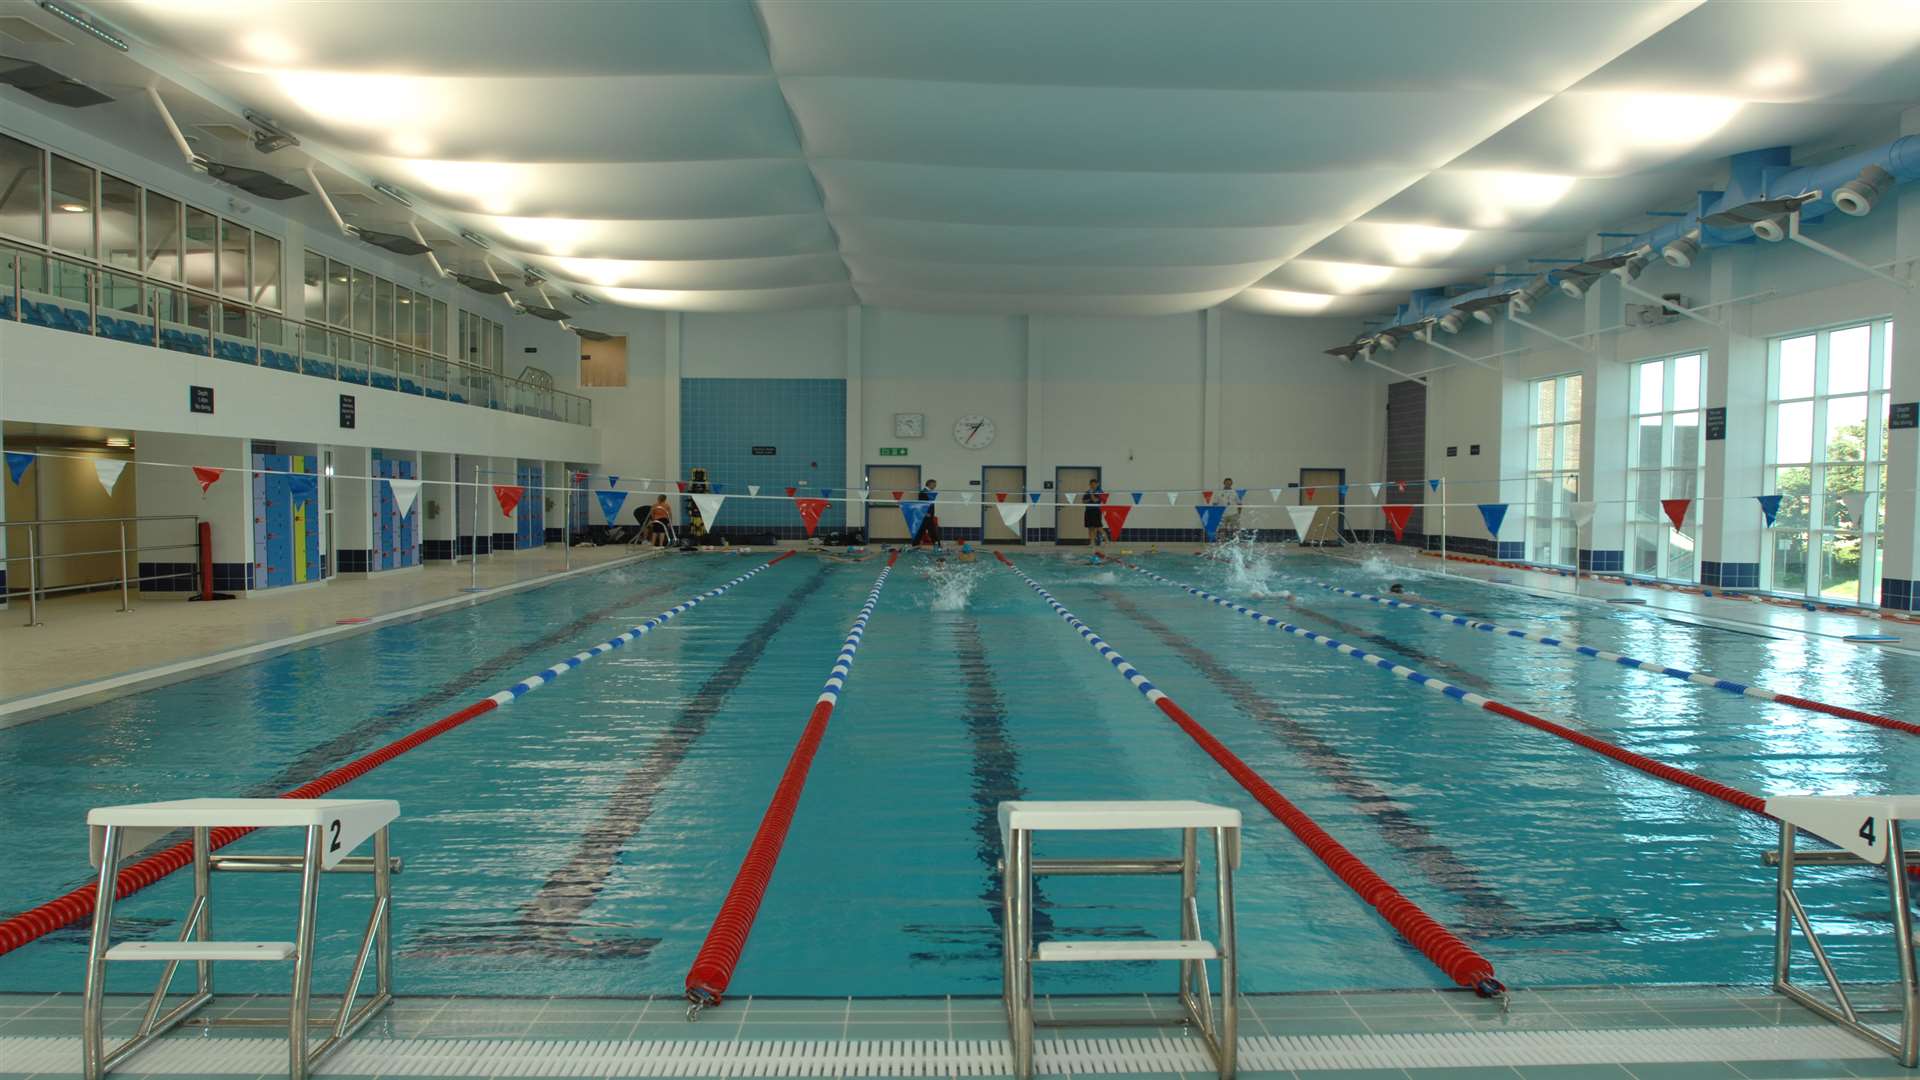 The swimming pool at the Stour Centre